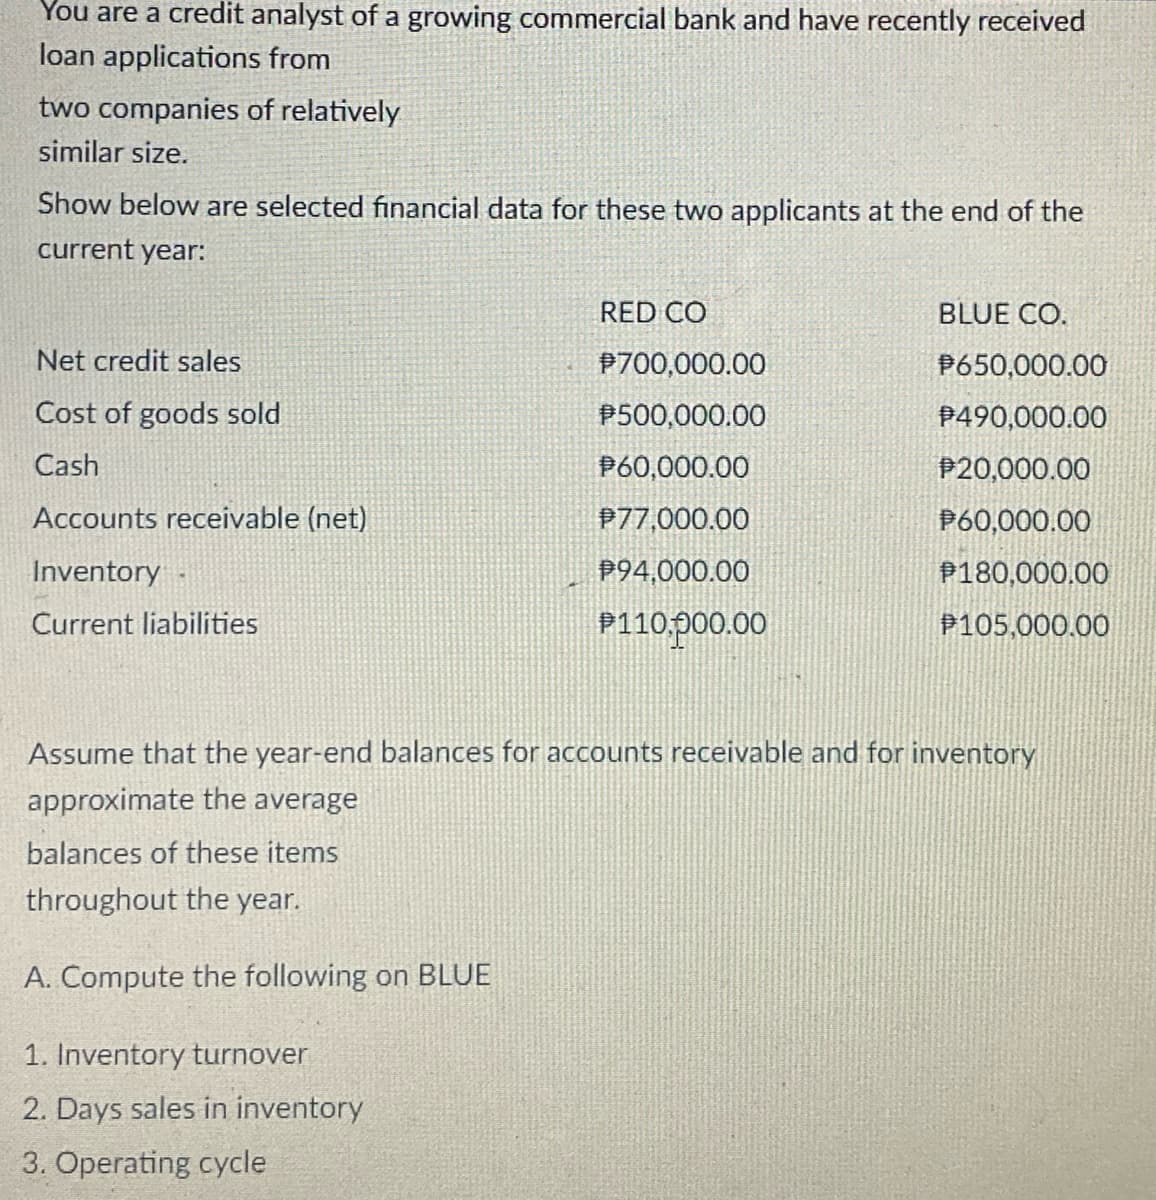 You are a credit analyst of a growing commercial bank and have recently received
loan applications from
two companies of relatively
similar size.
Show below are selected financial data for these two applicants at the end of the
current year:
RED CO
BLUE CO.
Net credit sales
P700,000.00
P650,000.00
Cost of goods sold
P500,000.00
P490,000.00
Cash
P60,000.00
P20,000.00
Accounts receivable (net)
P77,000.00
P60,000.00
Inventory
P94,000.00
P180,000.00
Current liabilities
P110,p00.00
P105,000.00
Assume that the year-end balances for accounts receivable and for inventory
approximate the average
balances of these items
throughout the year.
A. Compute the following on BLUE
1. Inventory turnover
2. Days sales in inventory
3. Operating cycle
